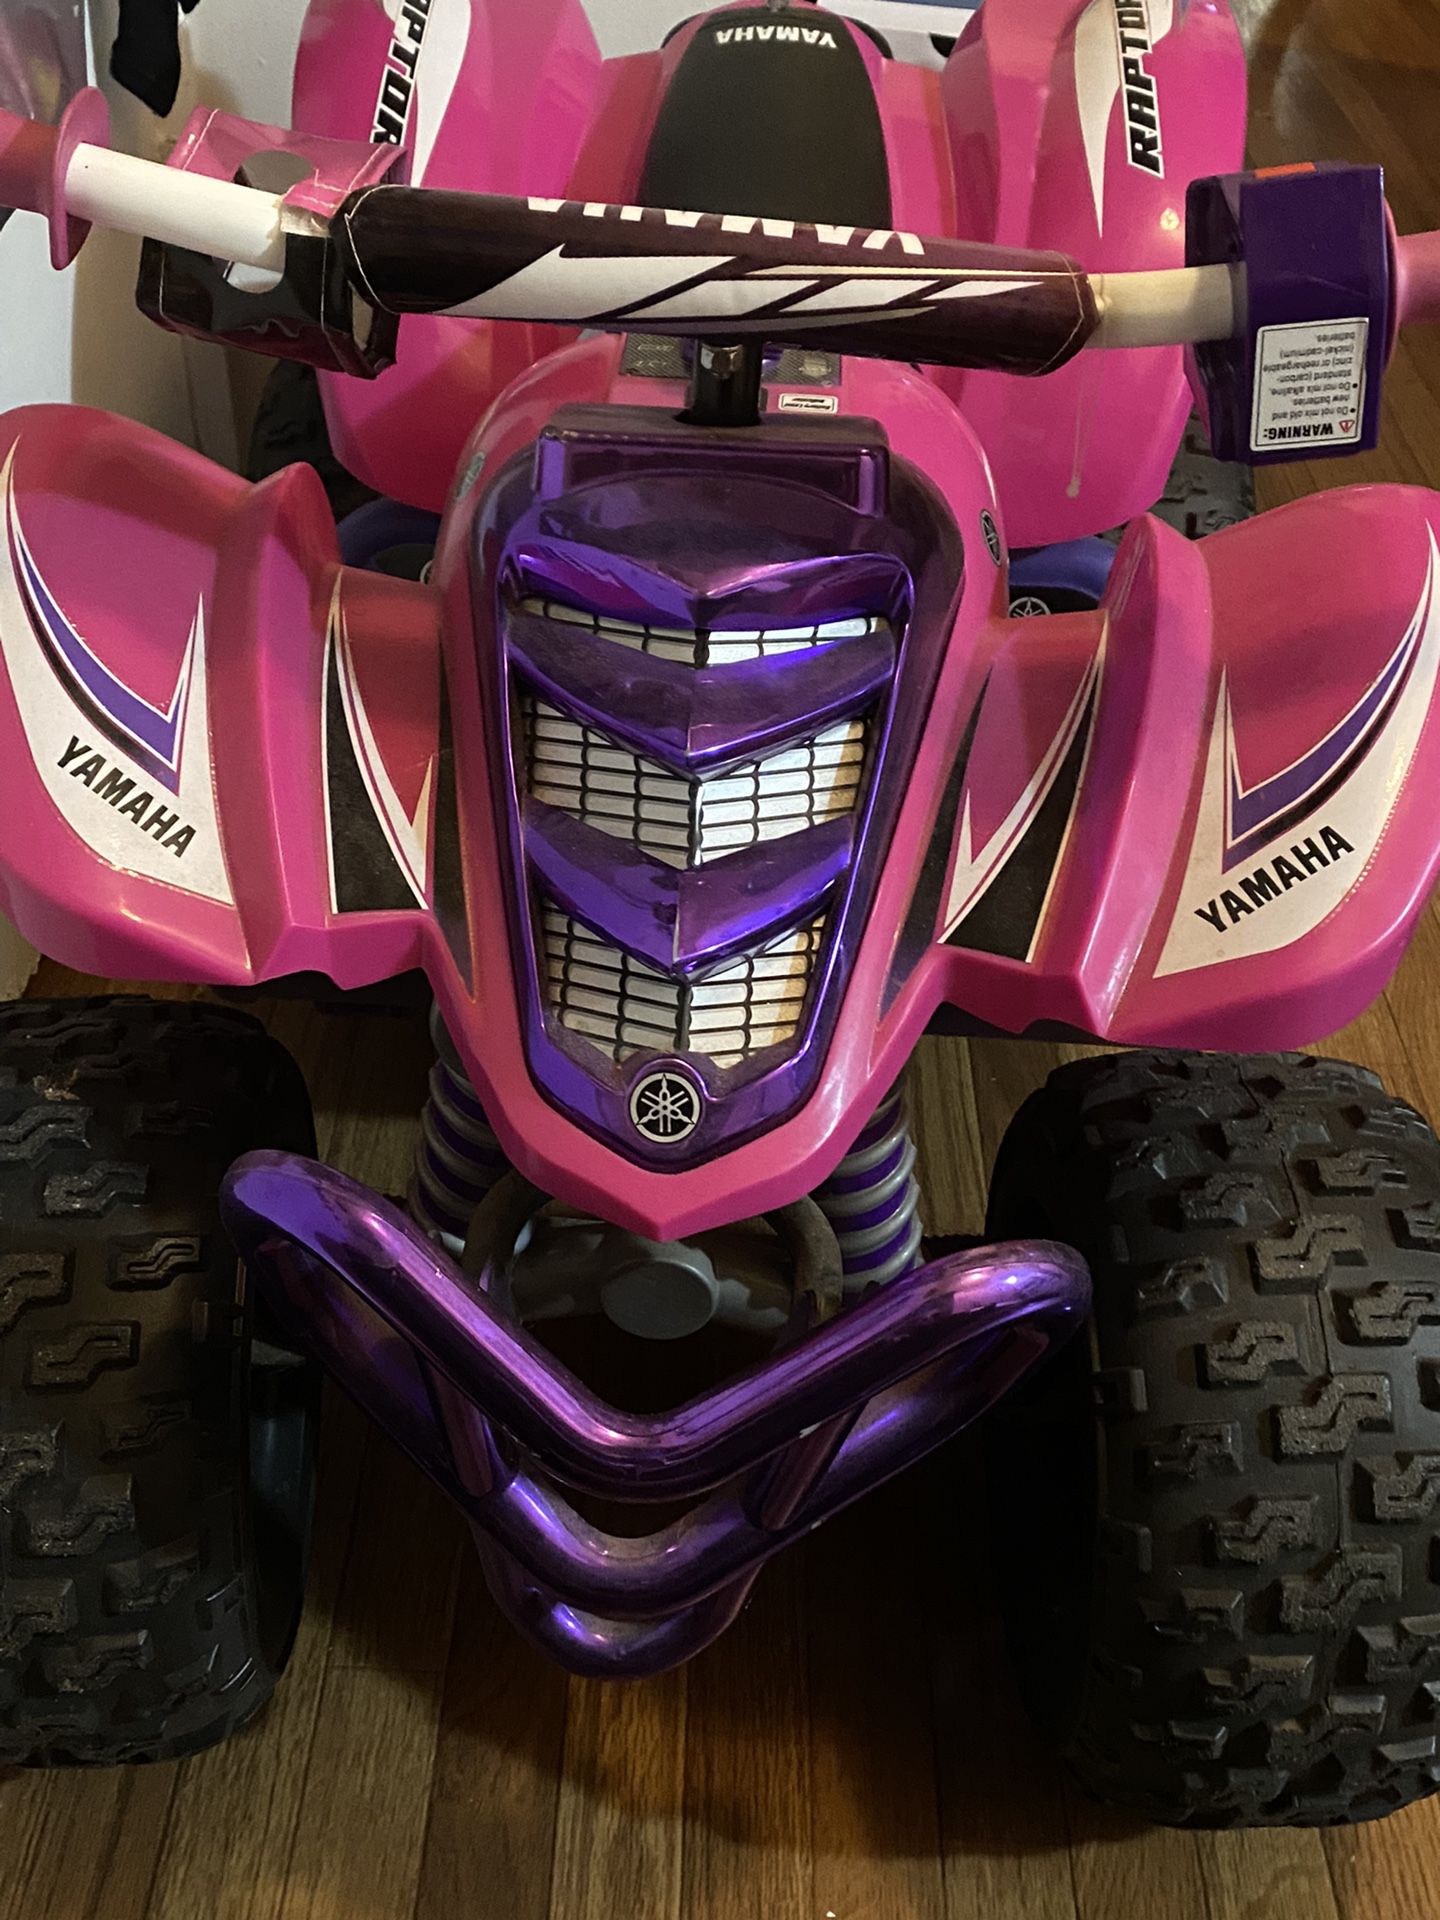 Yamaha Raptor 4 wheeler for sale300+ but retail now is &250  asking for $125,  